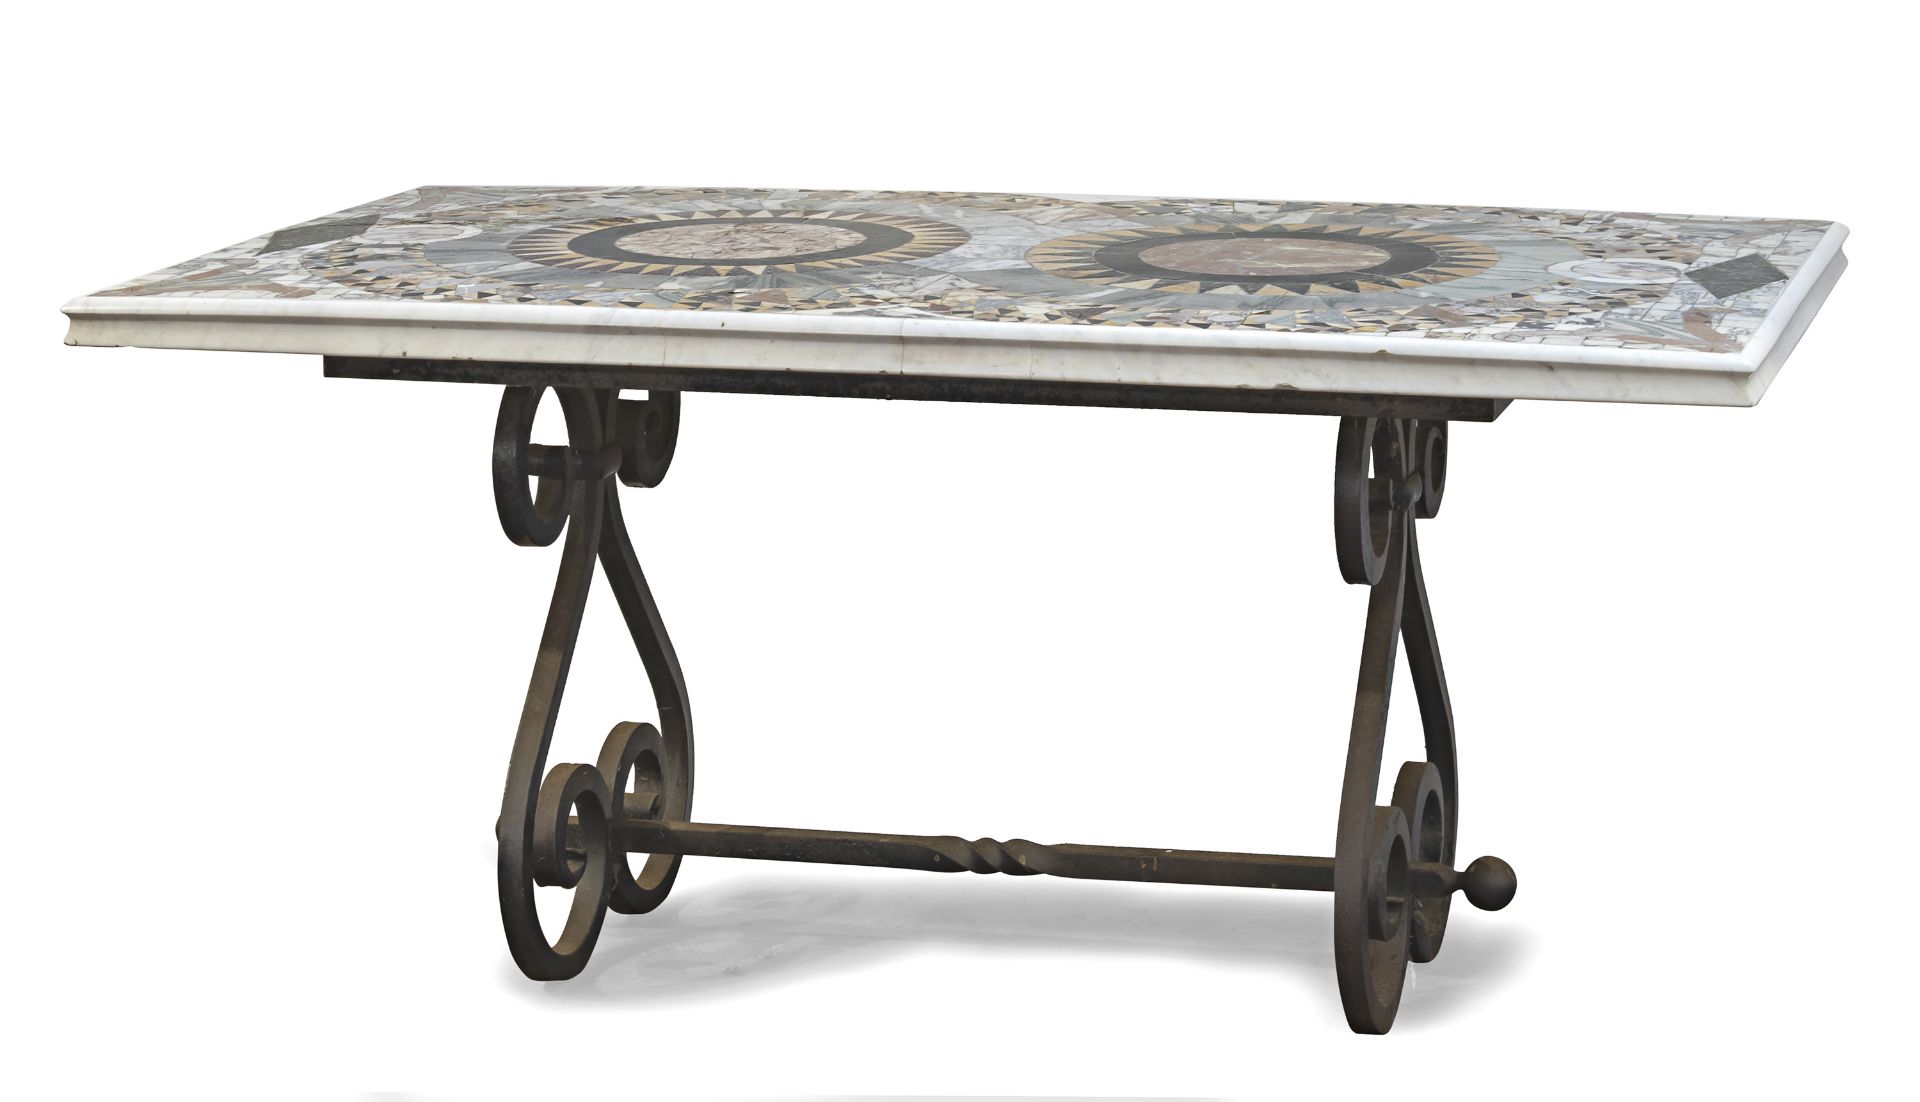 TABLE WITH TOP INLAID IN ANCIENT MARBLE EARLY 20TH CENTURY - Image 2 of 3